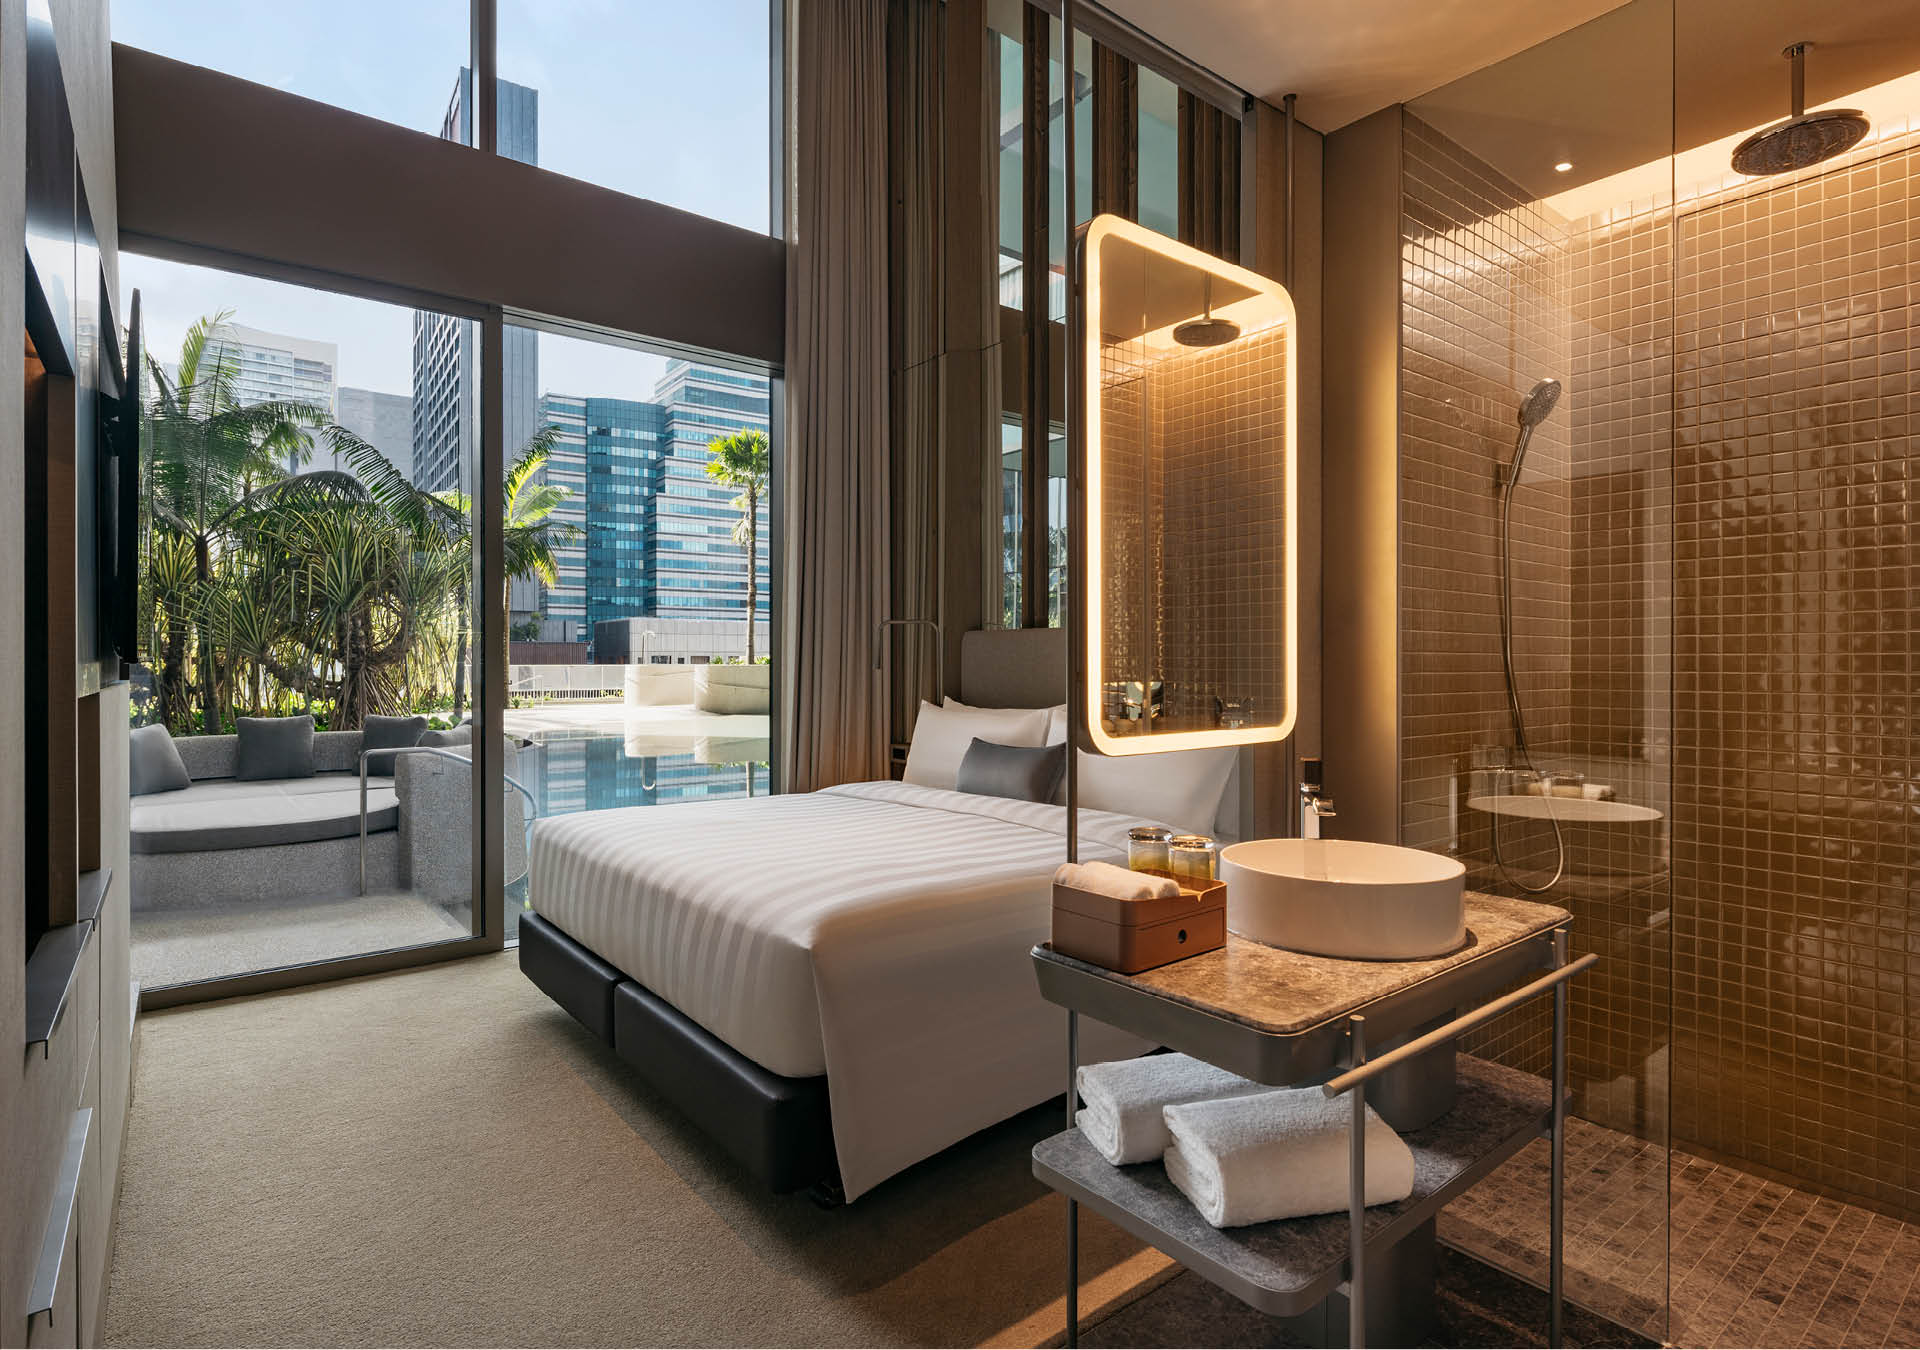 A loft room at Pan Pacific Orchard, with an ensuite shower visible through glass in the foreground, and a direct exit to a pool and patio in the background.